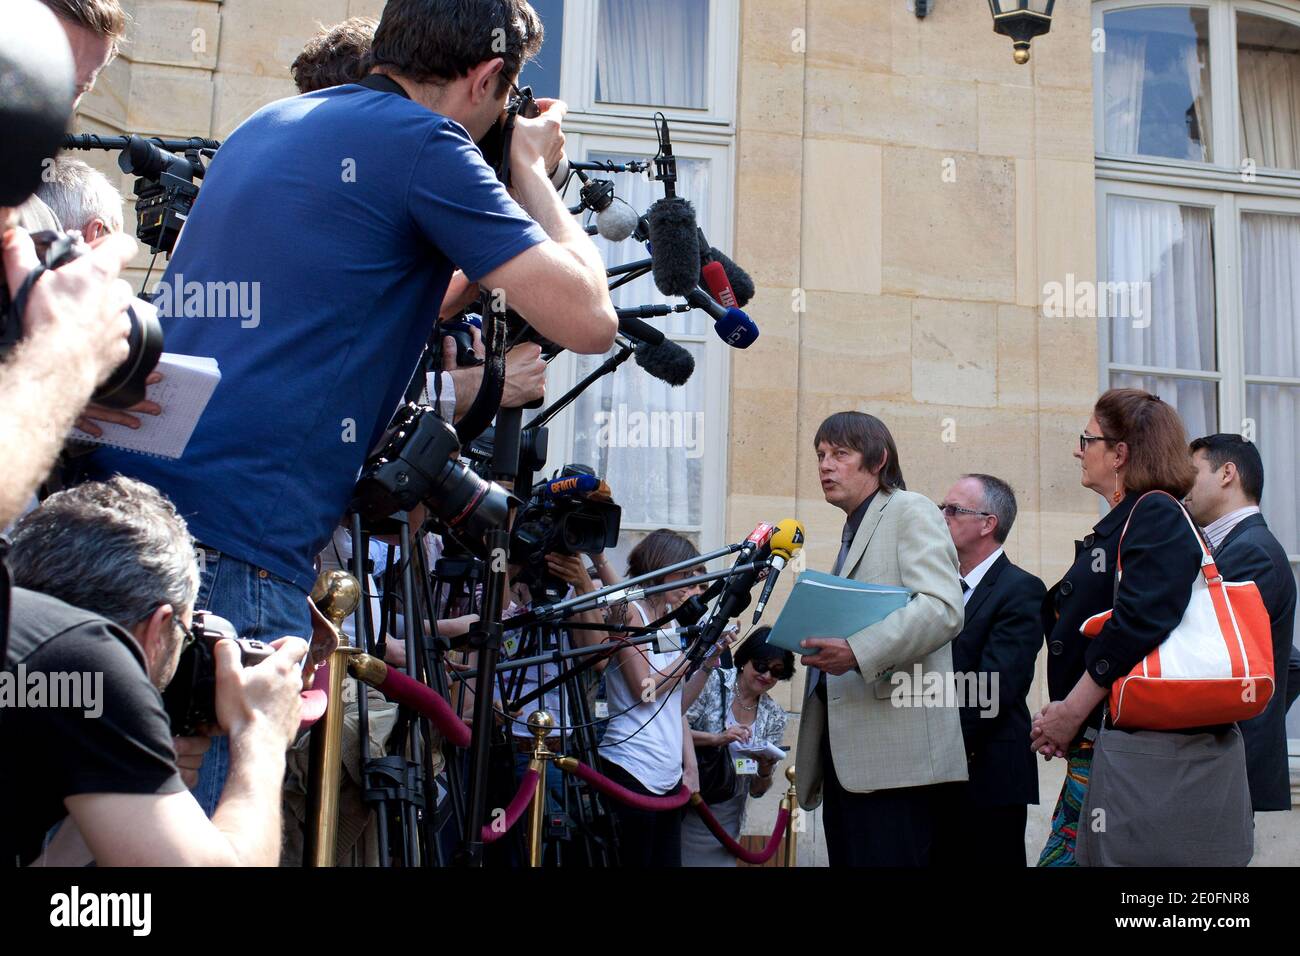 CGT labour union leader Bernard Thibault flanked by Eric Aubin answers to medias after a meeting with French Prime Minister, Jean-Marc Ayrault, at the Hotel Matignon, in Paris, France on May 29, 2012. Photo by Stephane Lemouton/ABACAPRESS.COM. Stock Photo